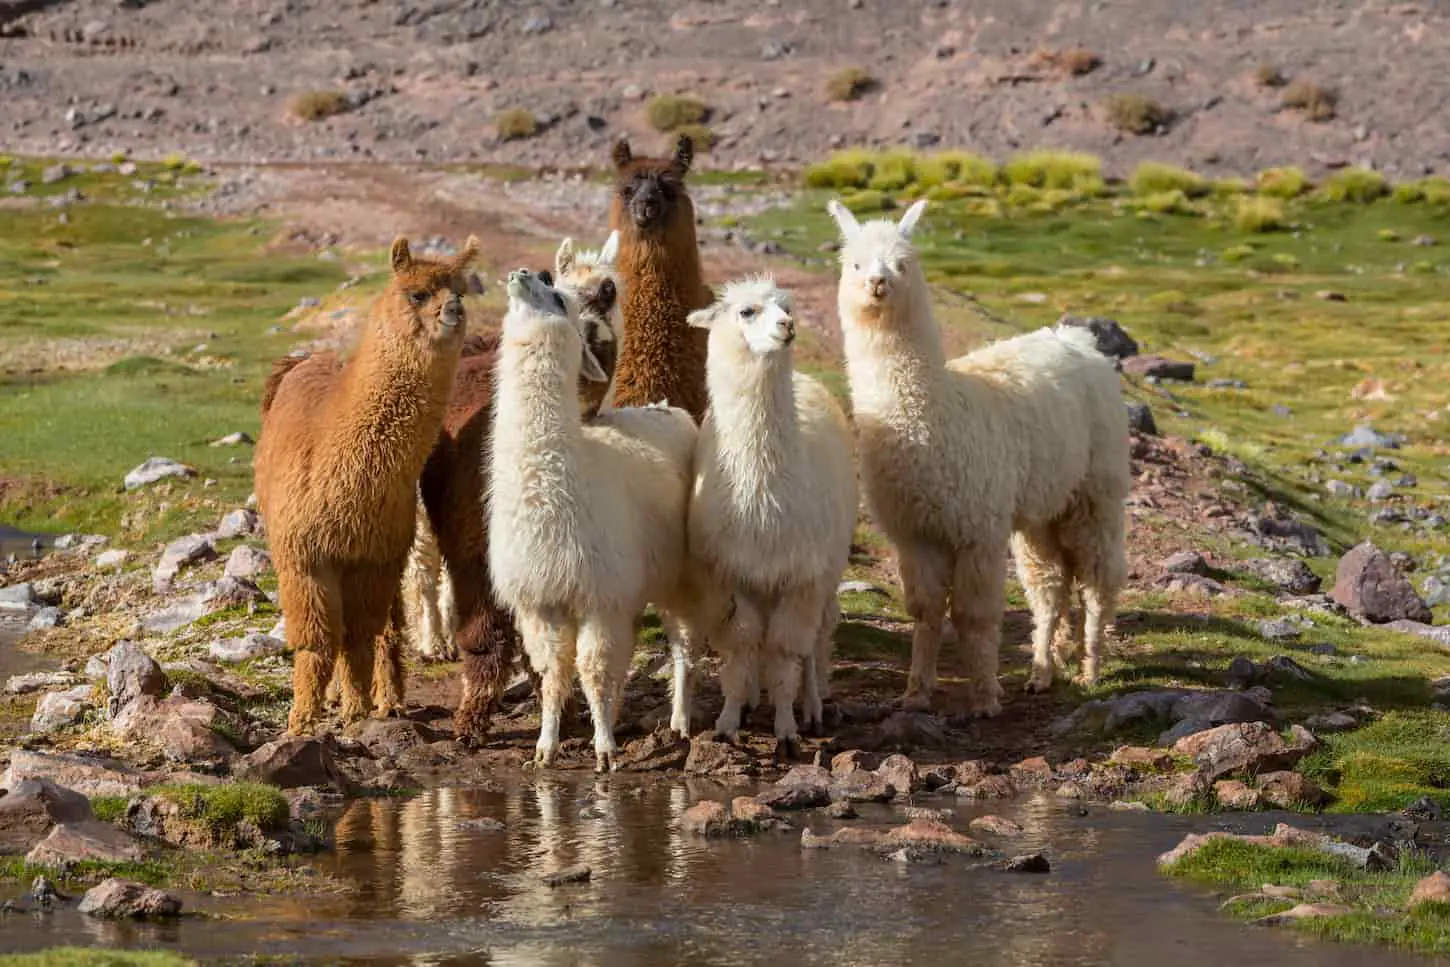 An image of a group of llamas standing in front of a water stream and looking at the camera.